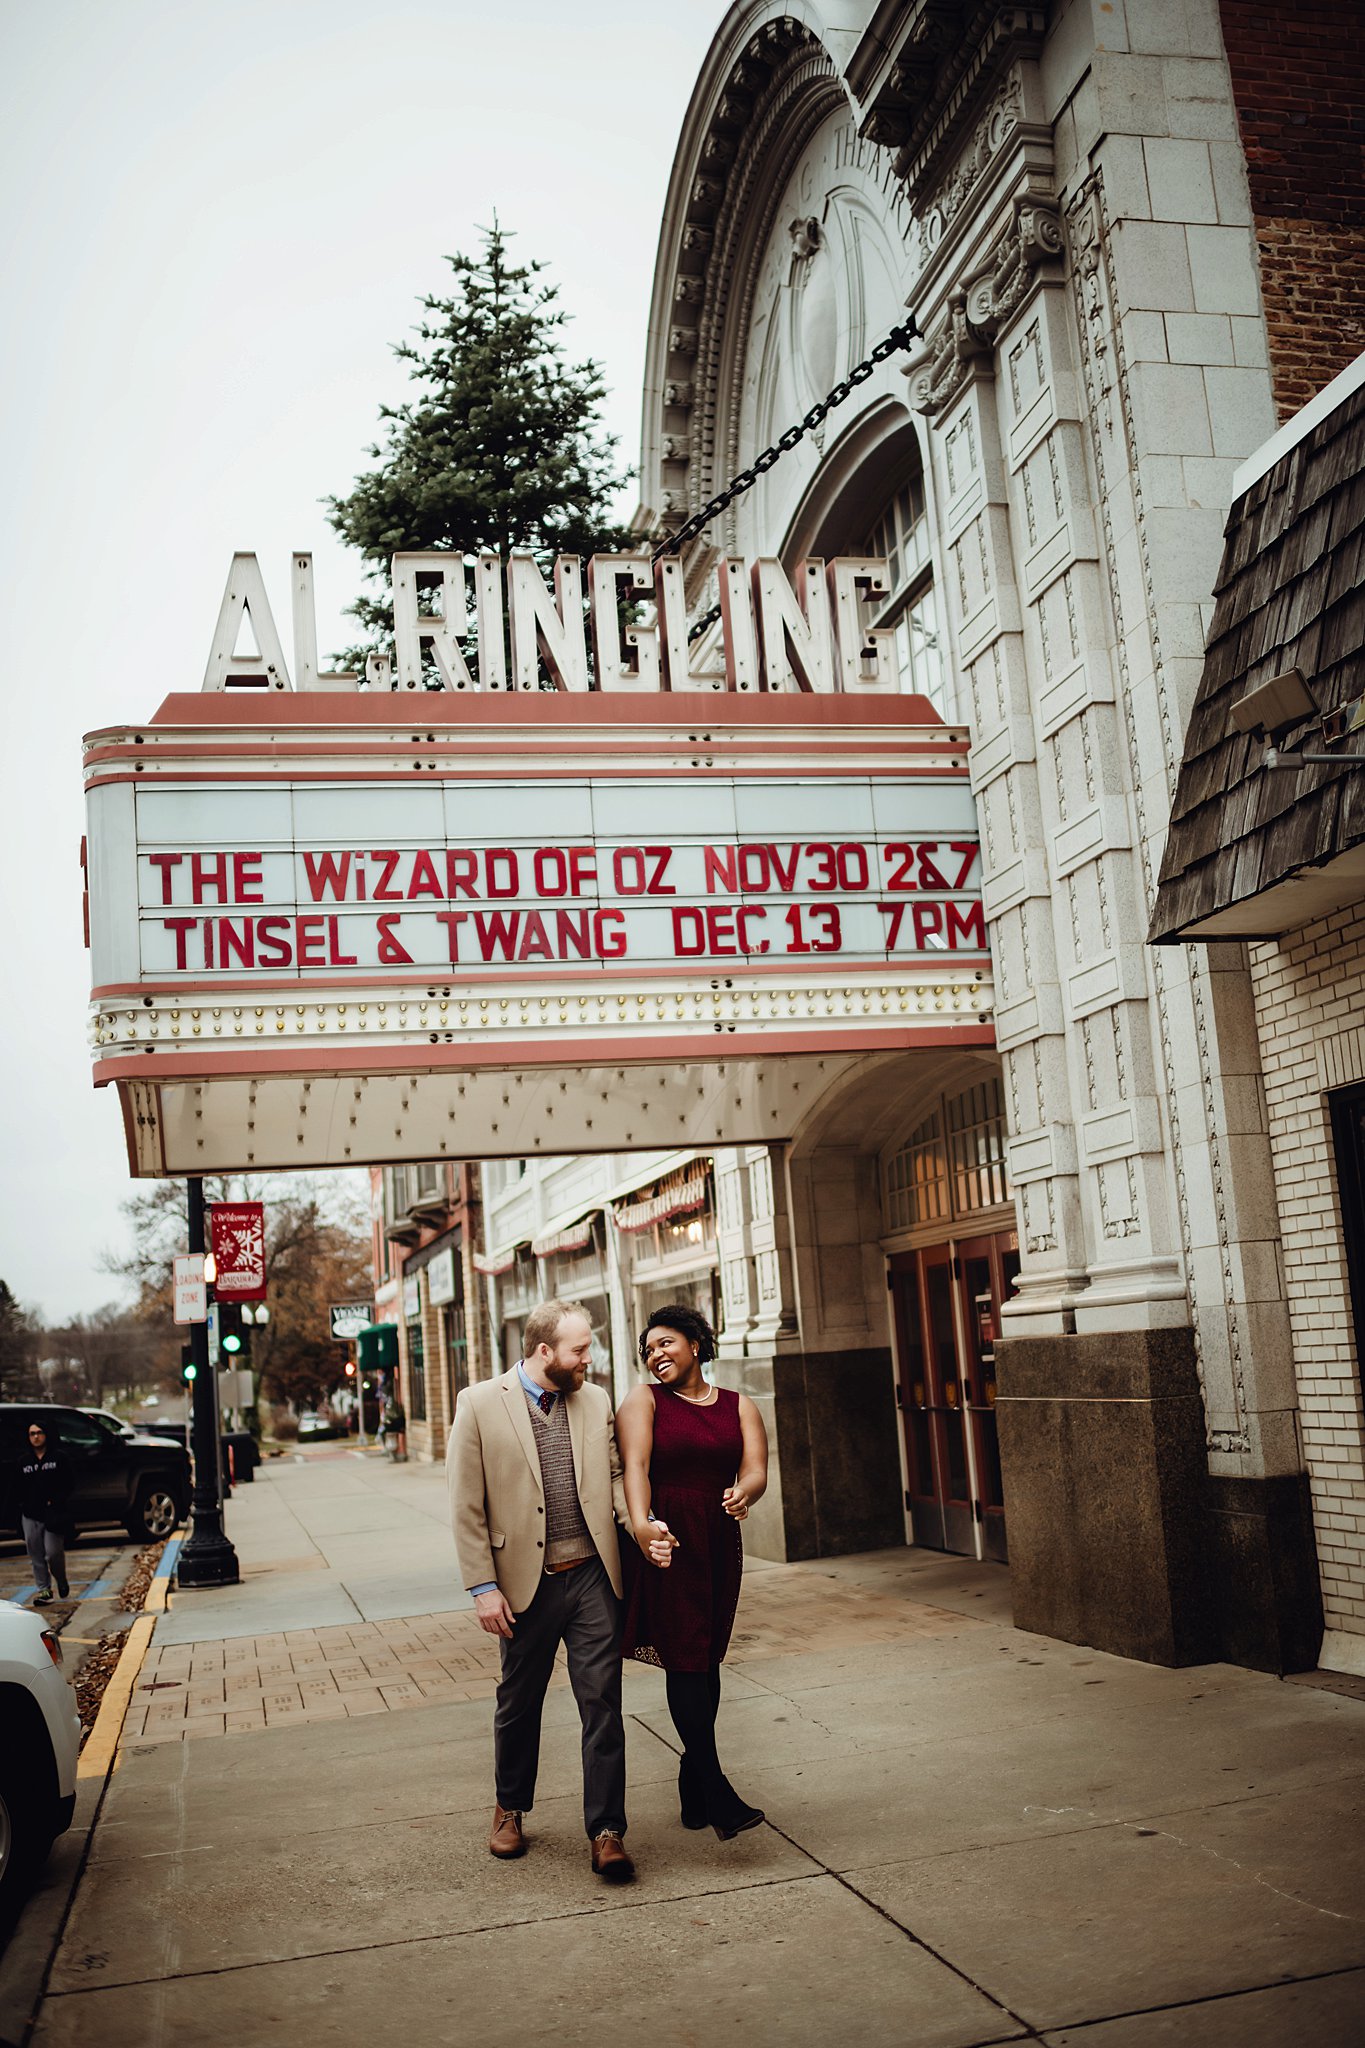 Music, Love, and Historic Charm: A Stunning Engagement Session at the Al. Ringling Theatre in Baraboo, WI